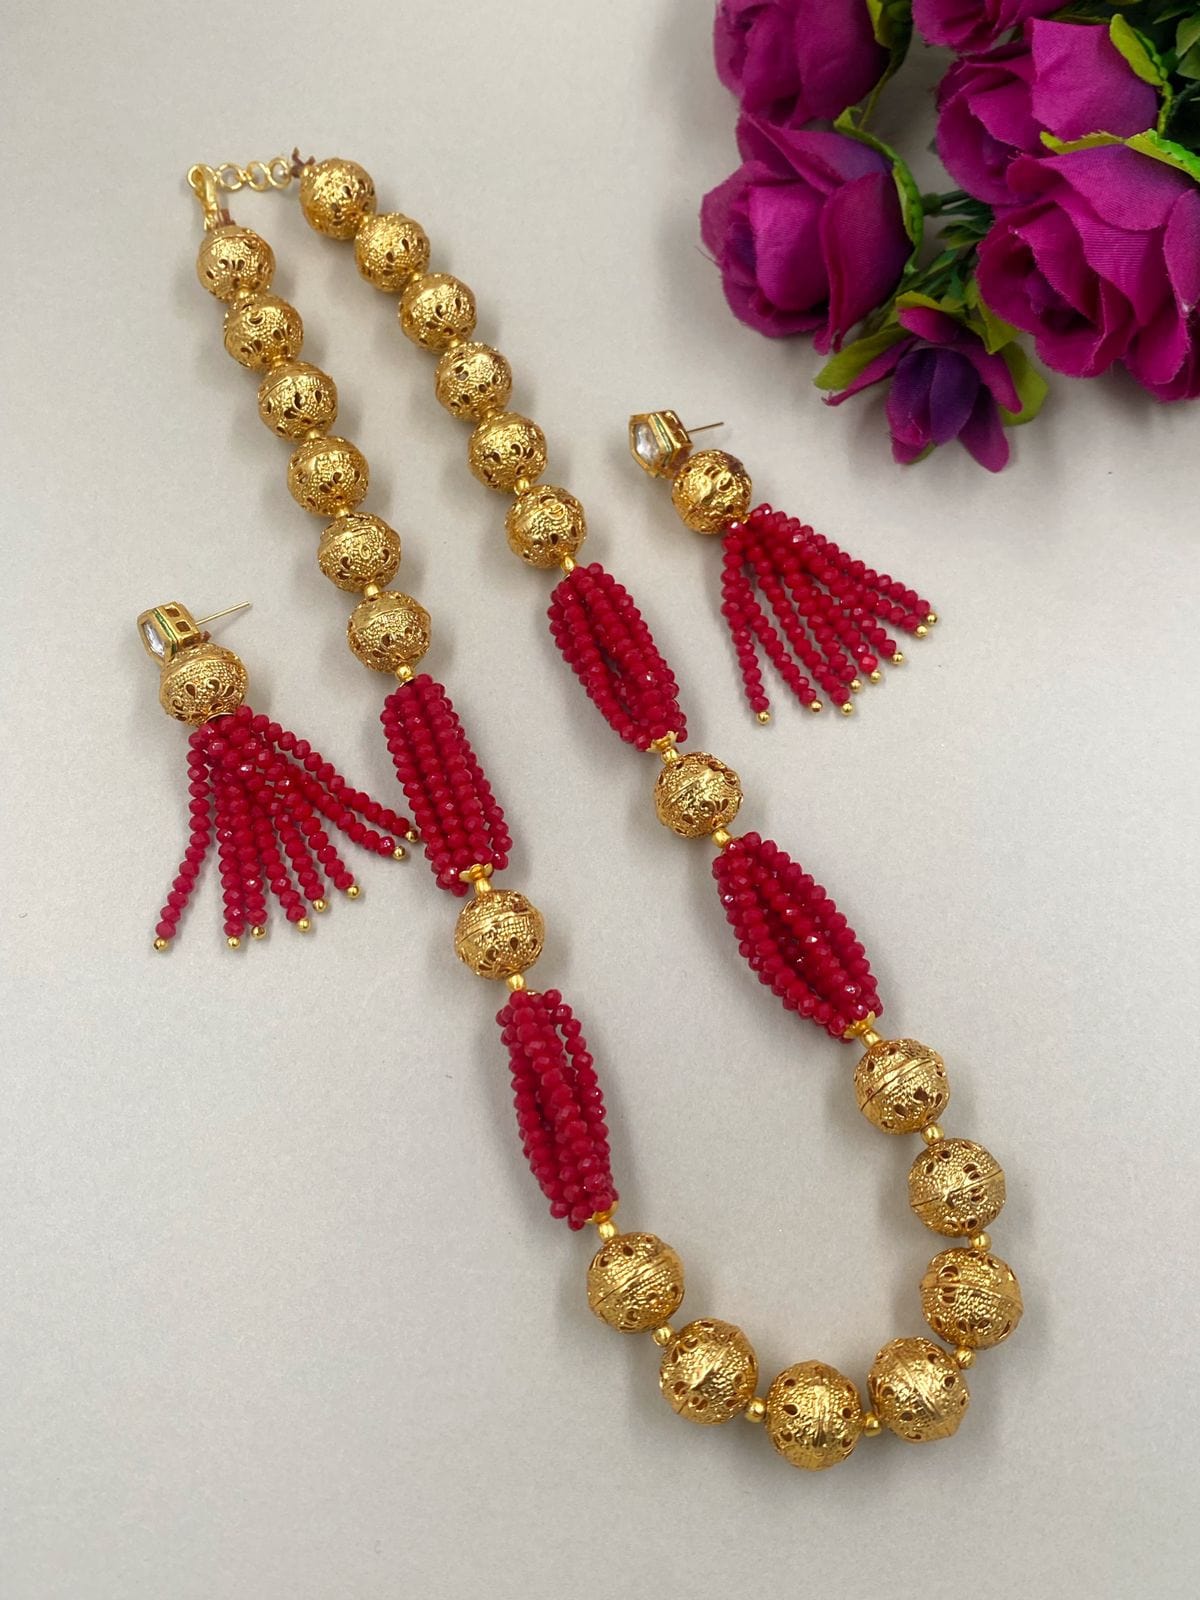 Designer Handcrafted Red Crystal And Golden Beads Necklace For Woman By Gehna Shop Beads Jewellery